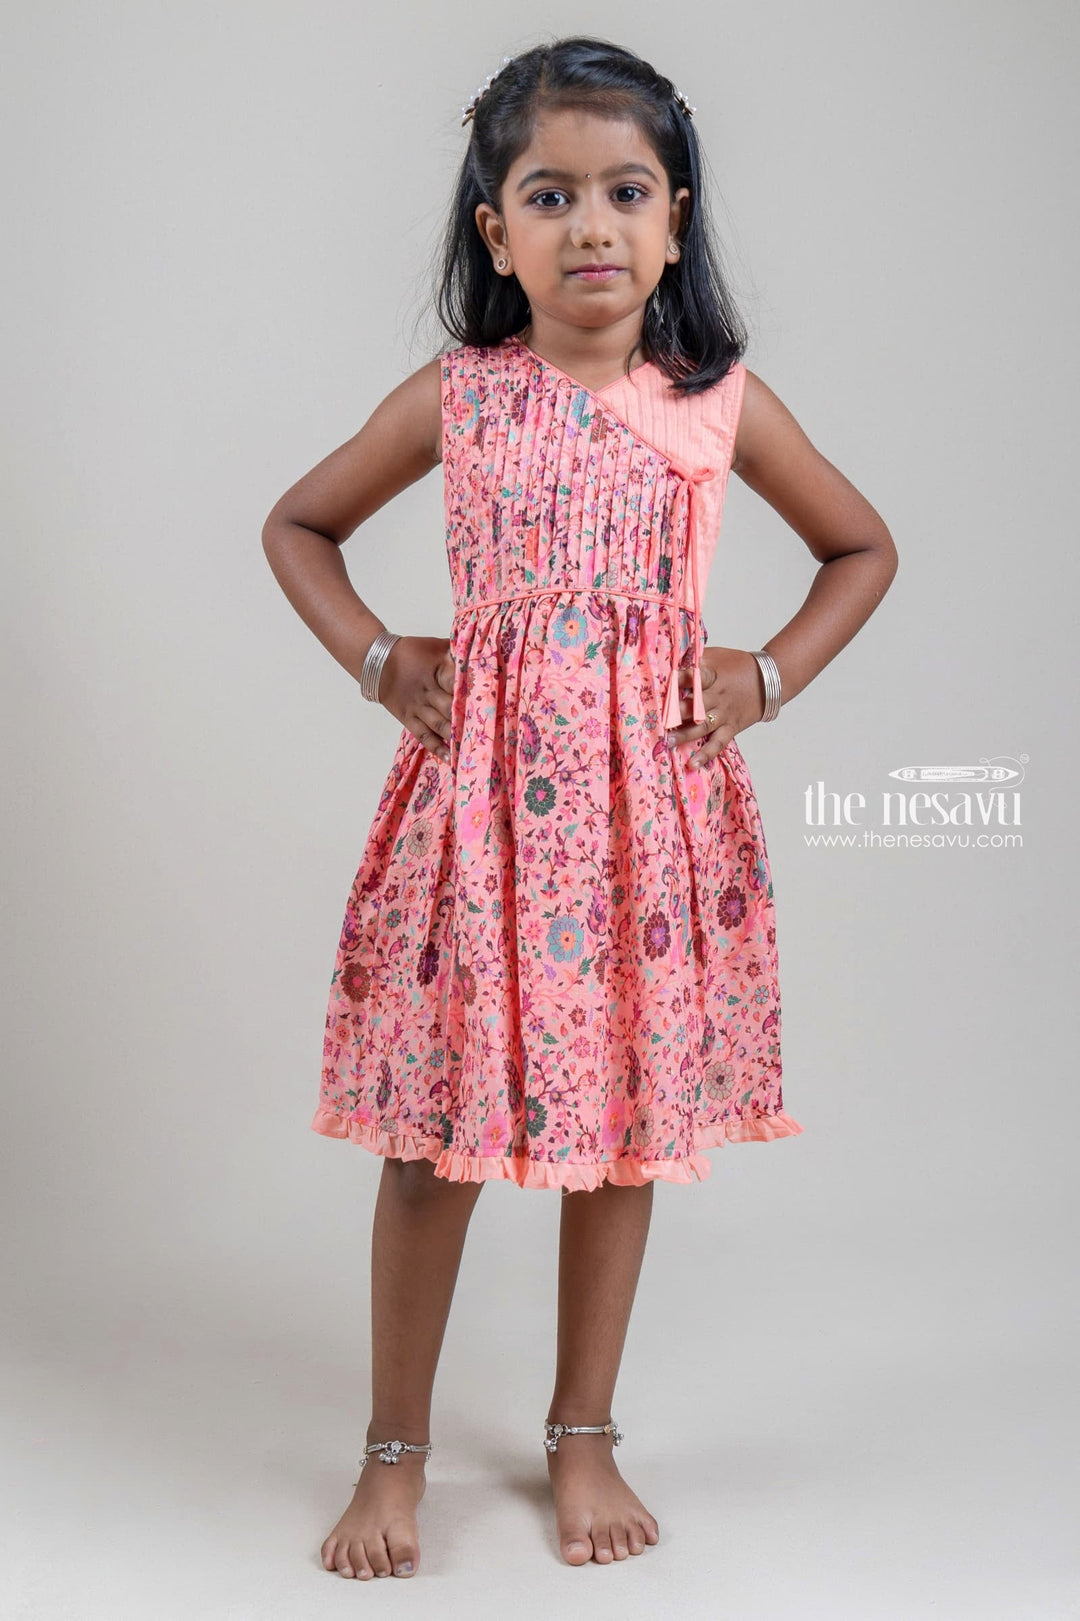 The Nesavu Girls Fancy Frock Gorgeous Salmon Pink Paisley N Floral Printed Pleated Casual Frock For Girls Nesavu 16 (1Y) / Salmon / Chanderi GFC1048B-16 Paisley Printed Frock For Girls | New Arrival | The Nesavu